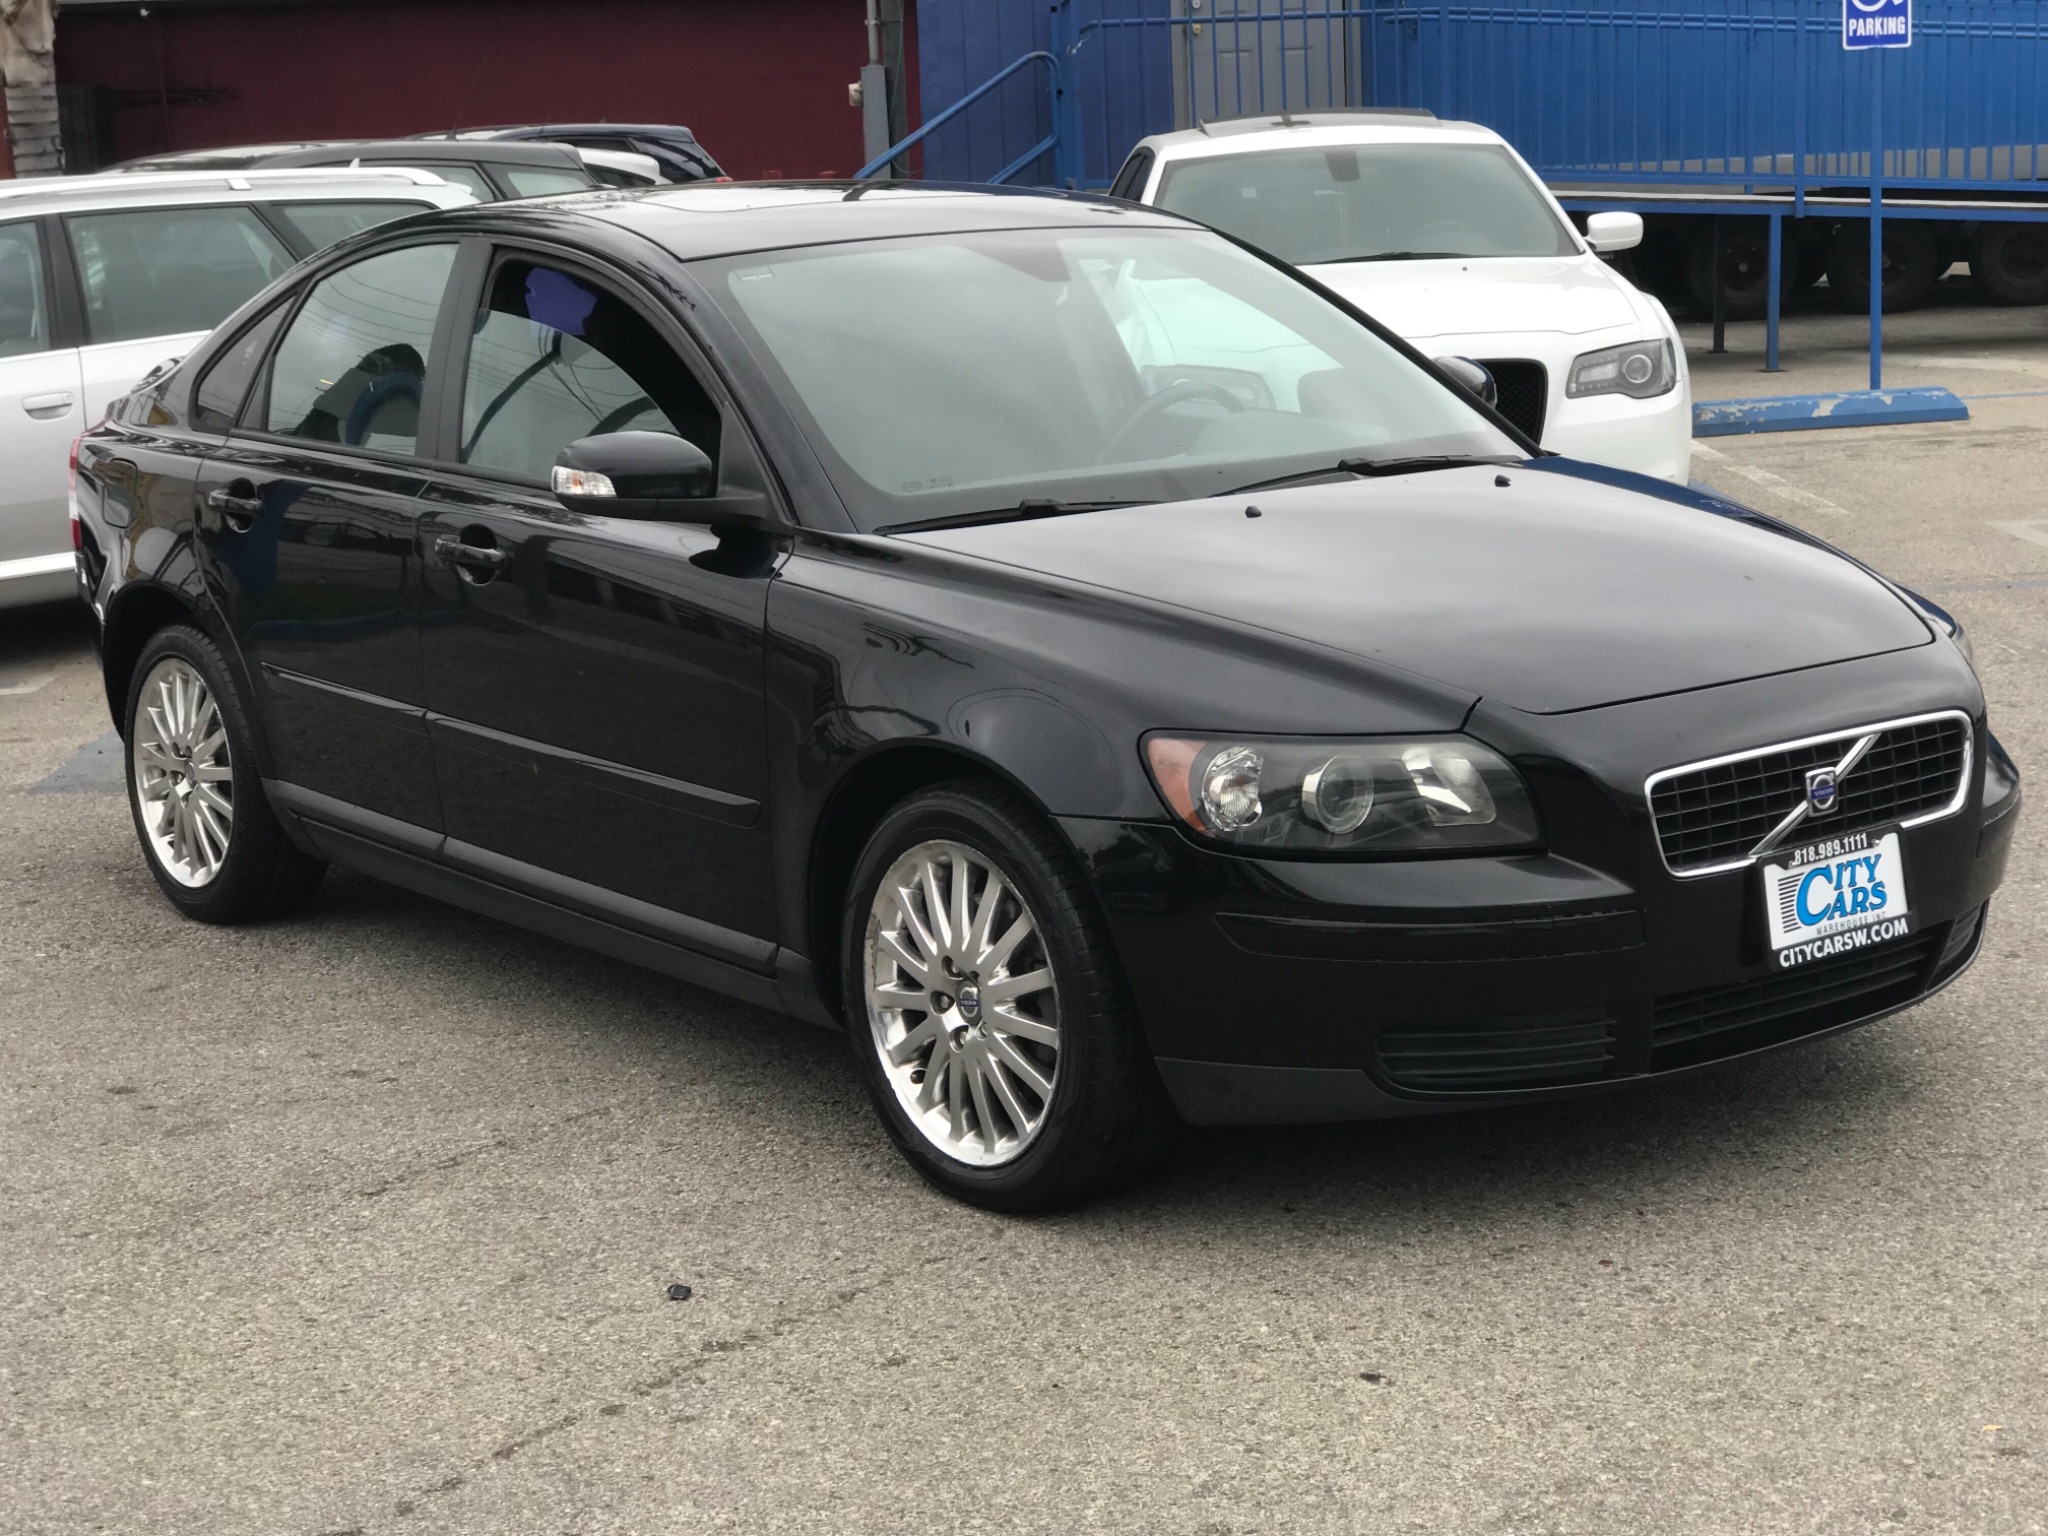 Used 2007 Volvo S40 2.4L at City Cars Warehouse INC